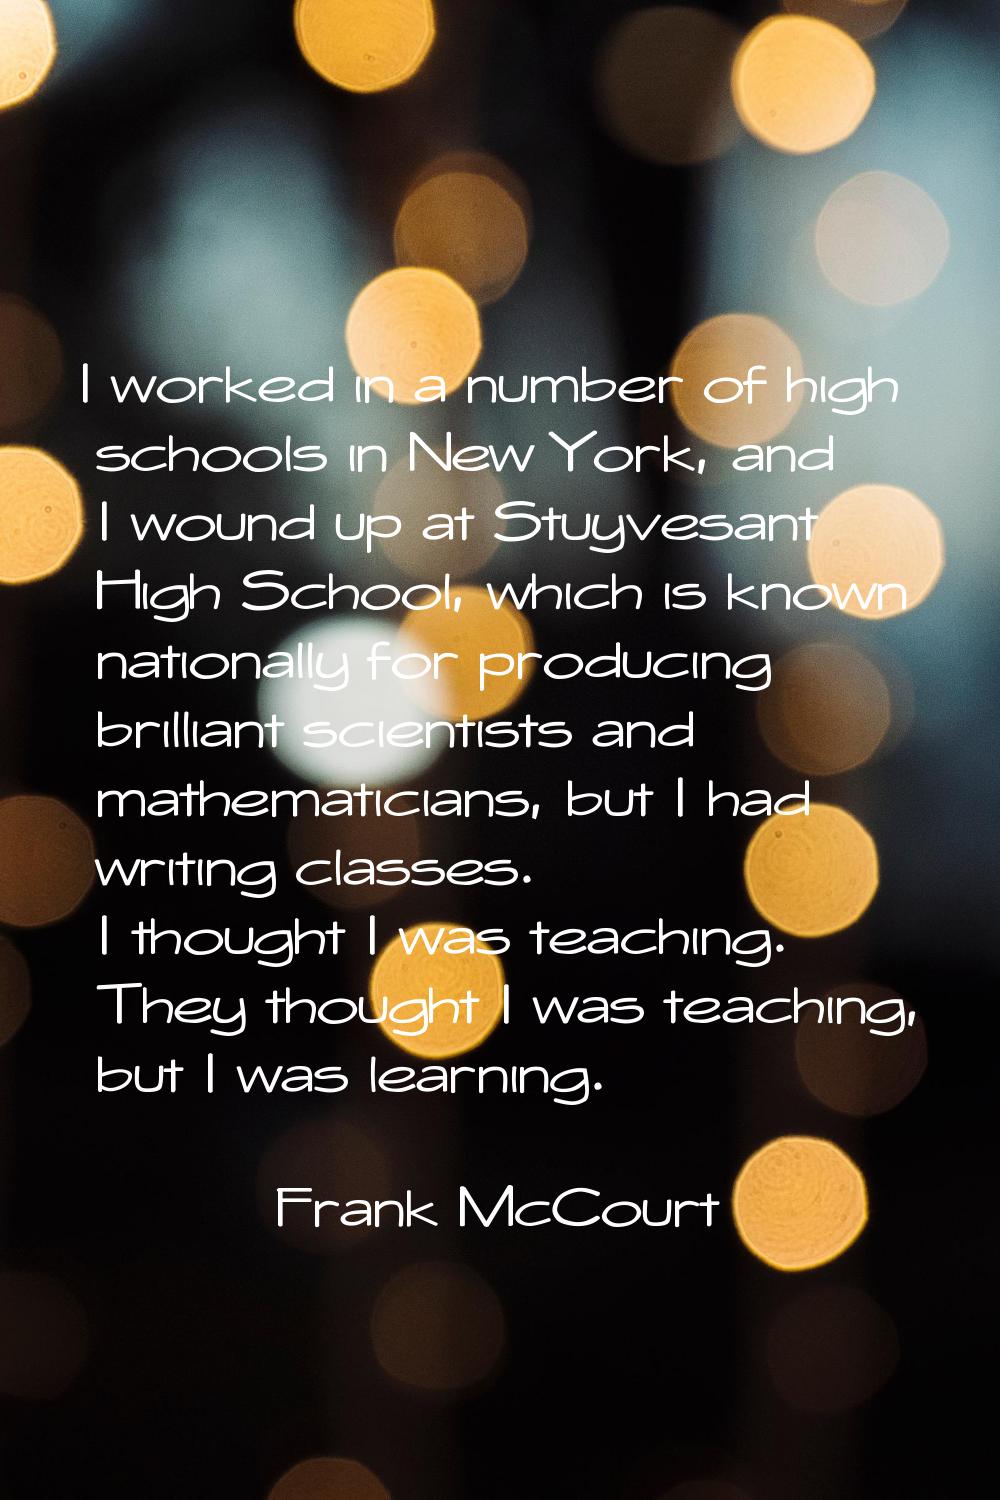 I worked in a number of high schools in New York, and I wound up at Stuyvesant High School, which i